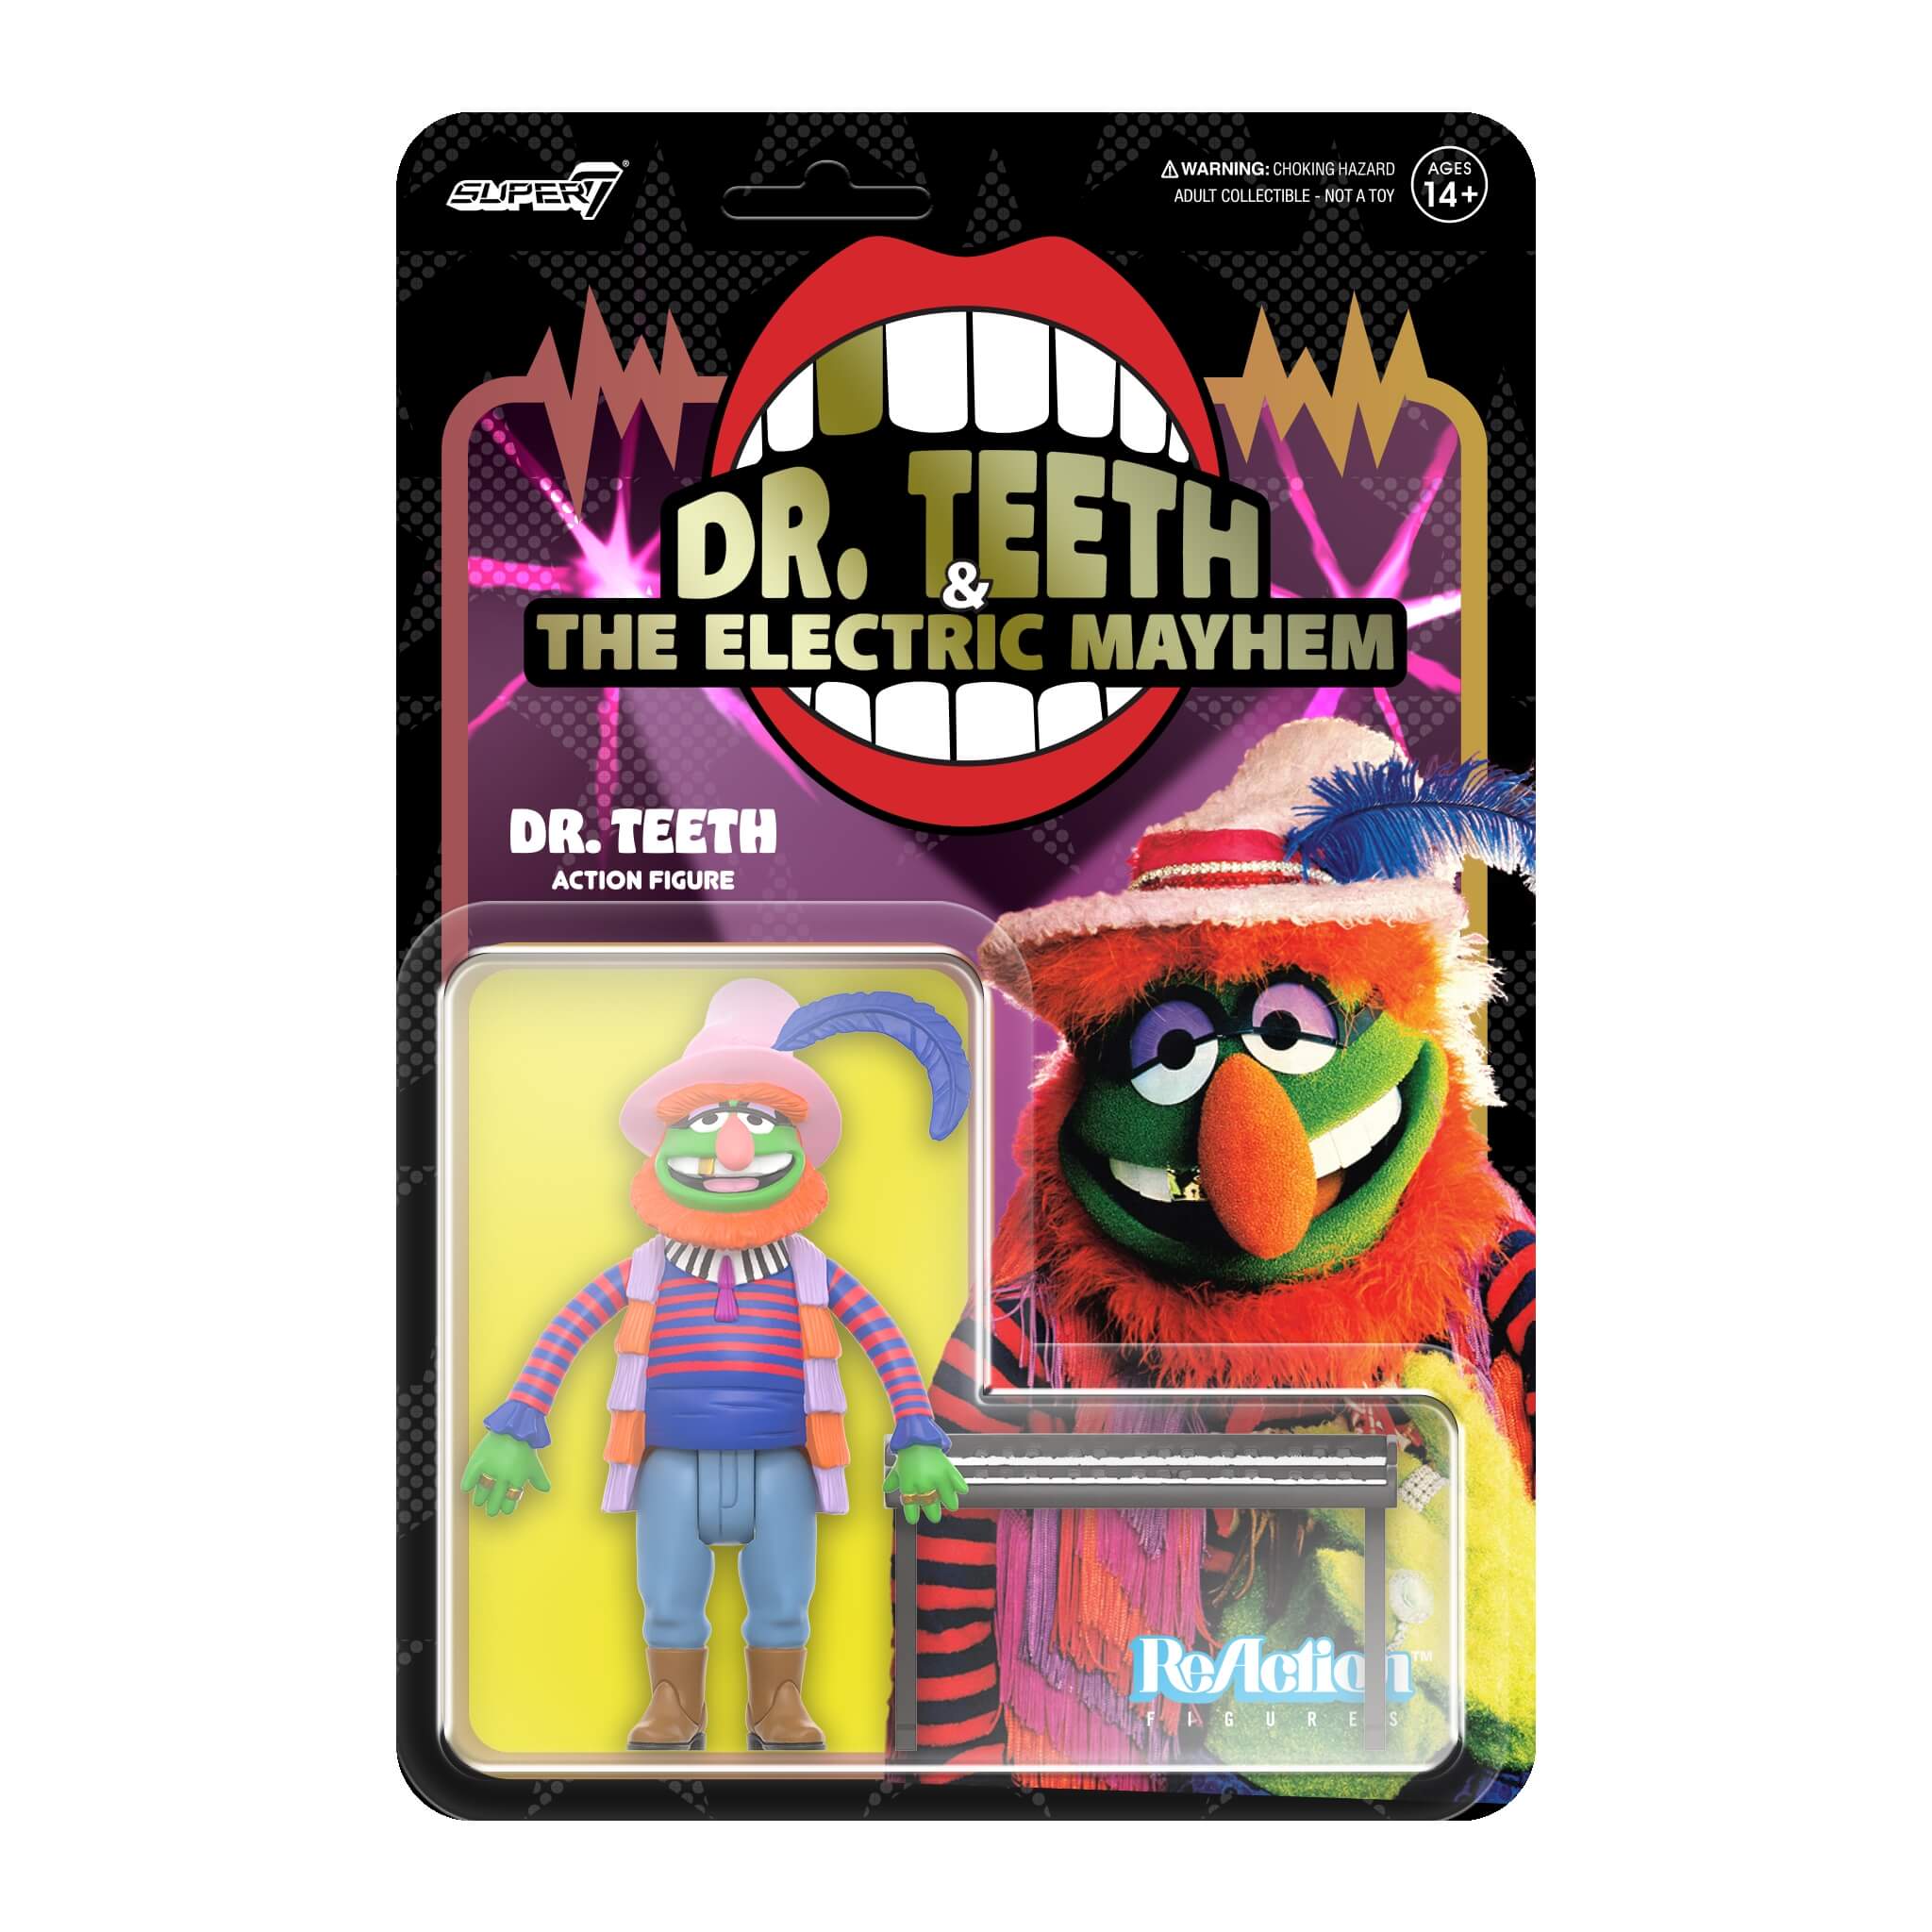 The Muppets ReAction Figures Wave 1  - Electric Mayhem Band - Dr. Teeth